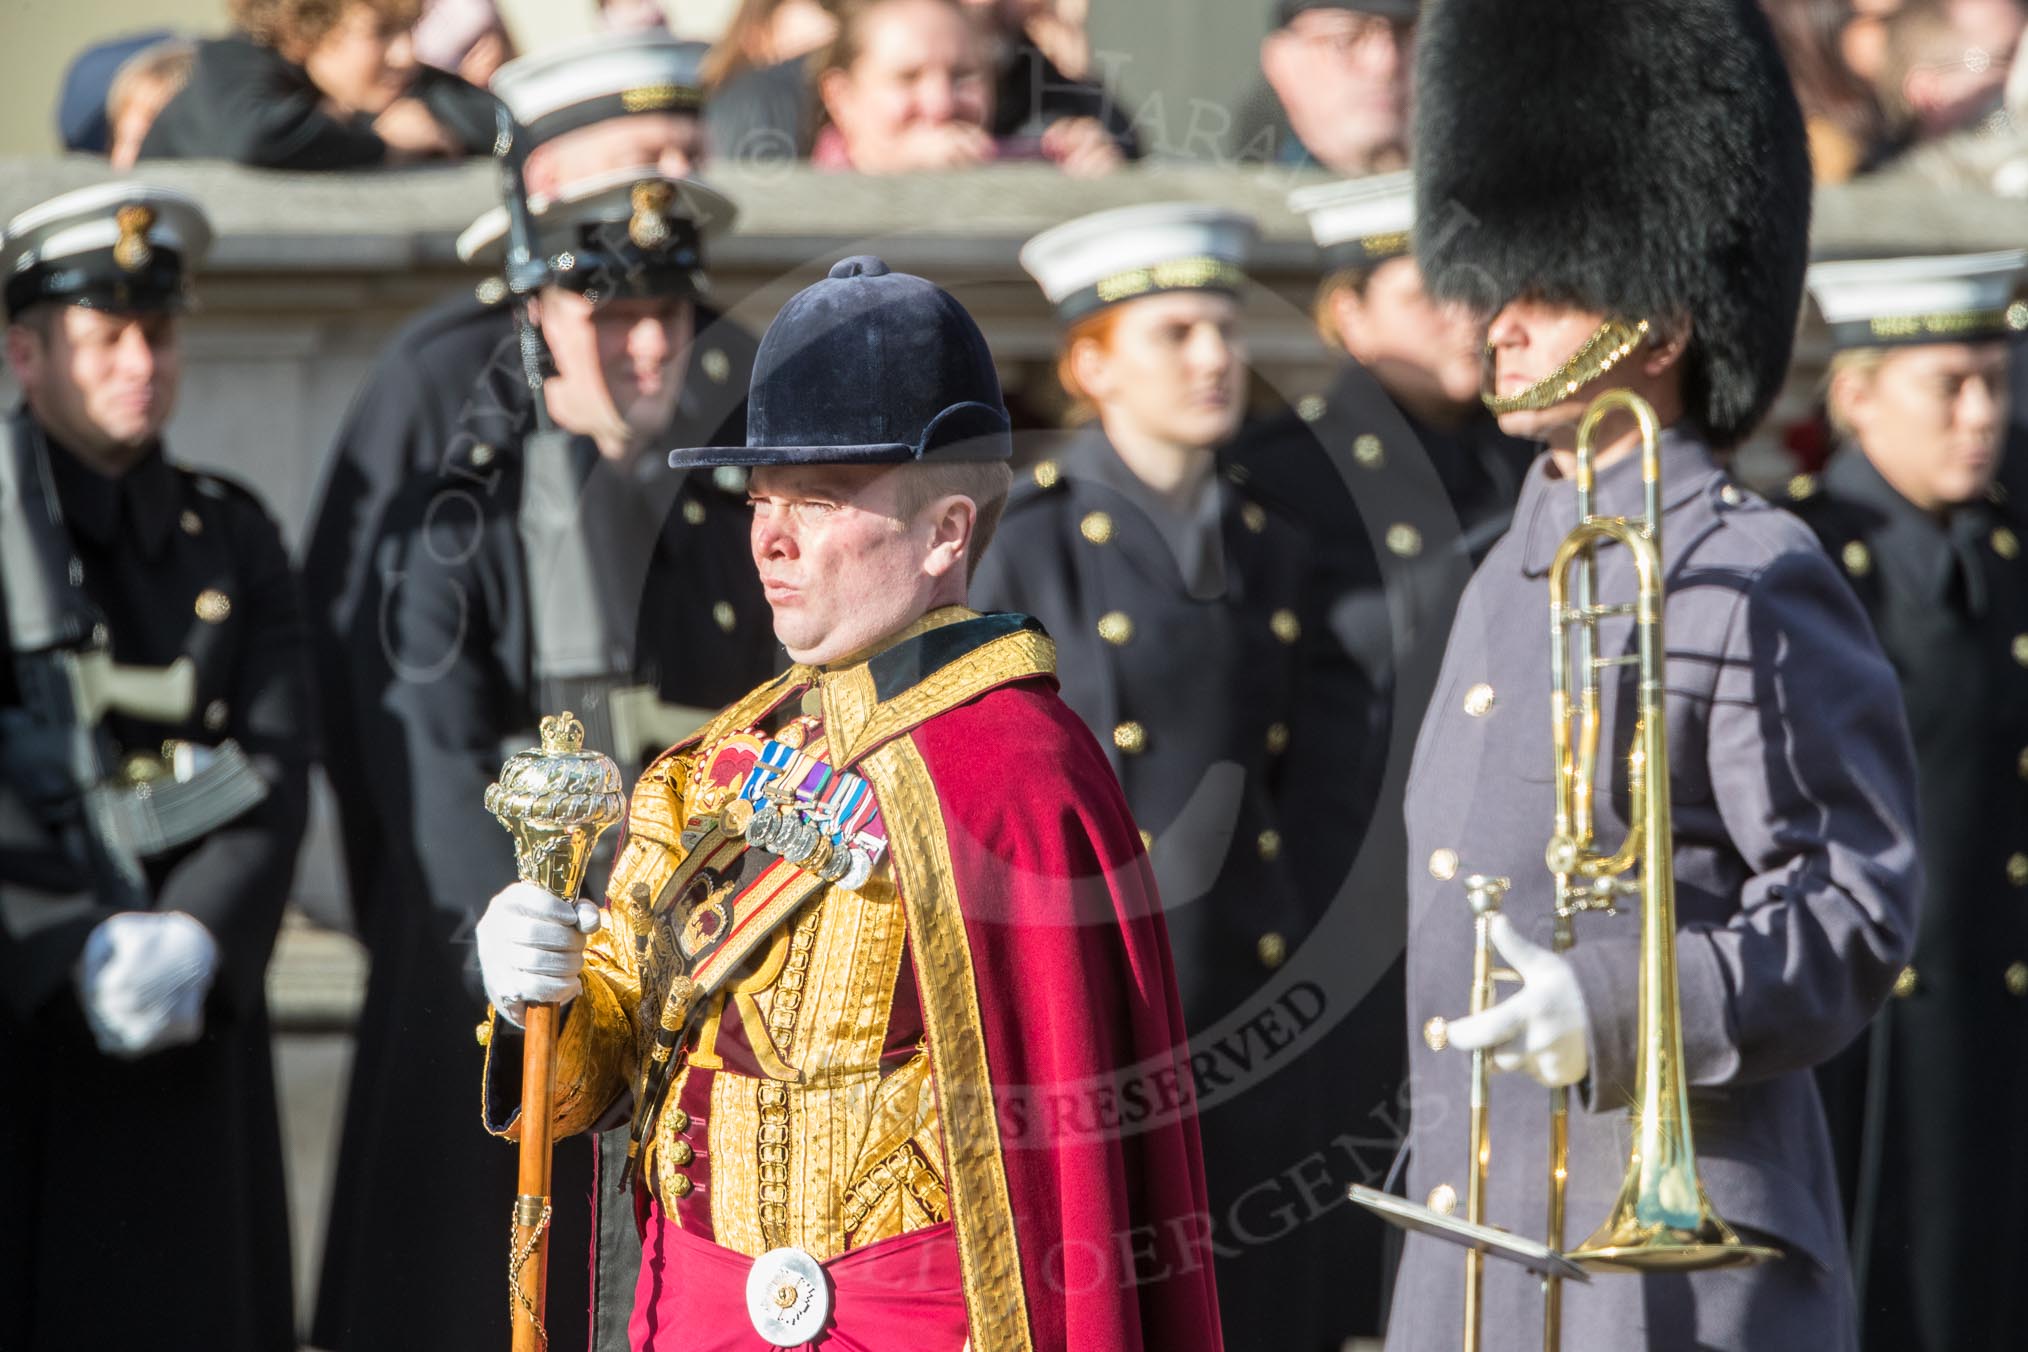 March Past, Remembrance Sunday at the Cenotaph 2016.
Cenotaph, Whitehall, London SW1,
London,
Greater London,
United Kingdom,
on 13 November 2016 at 12:32, image #349